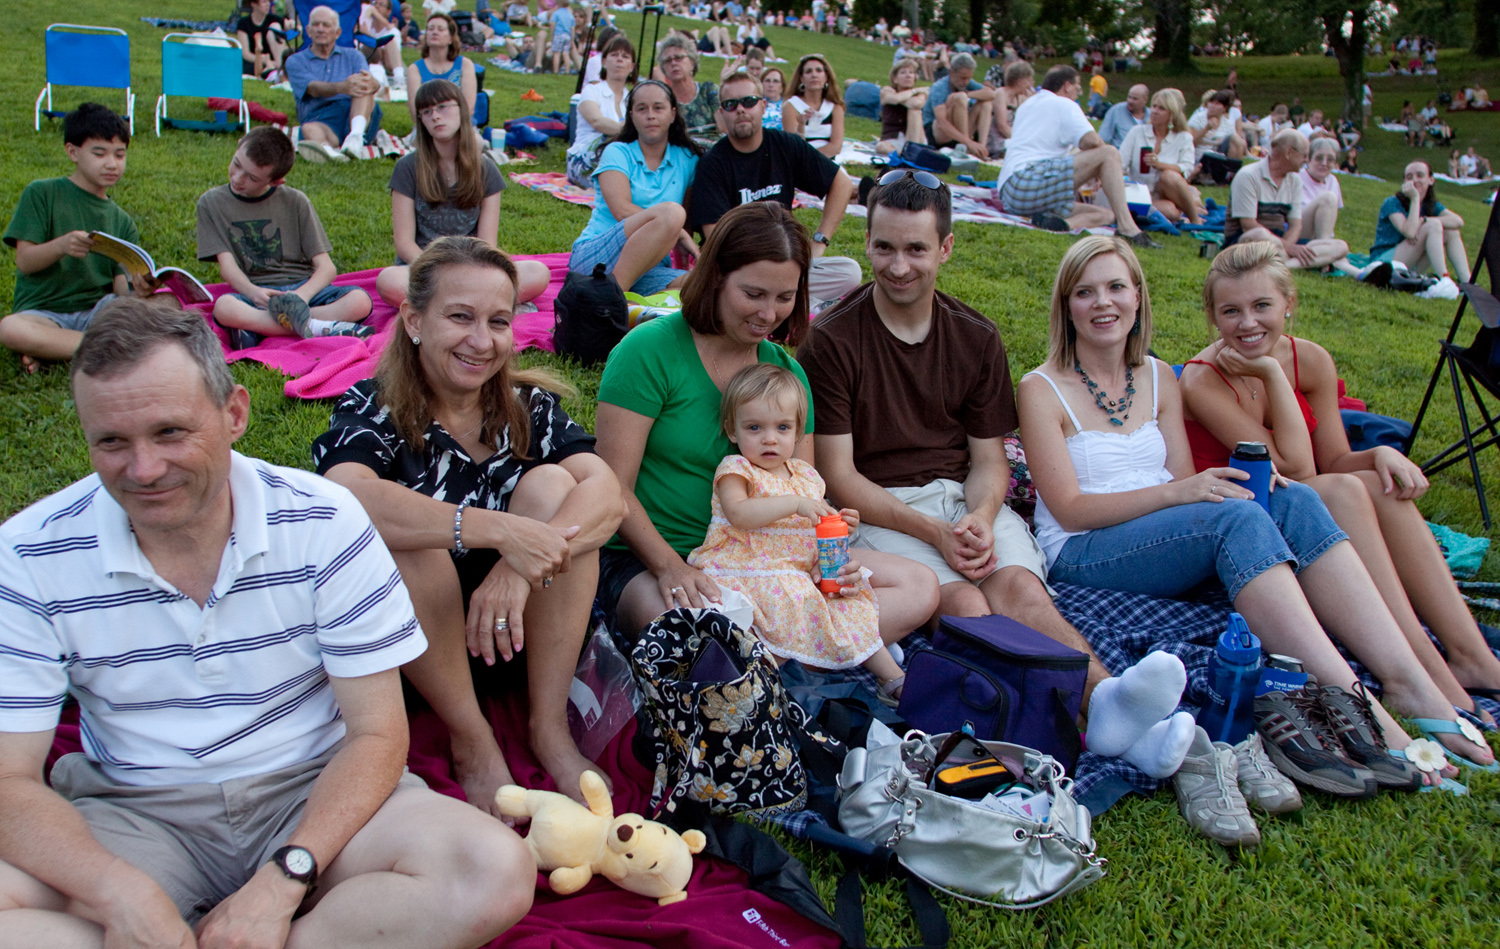 Each summer families gather for KSO concerts in Devou Park to create memories and for some multi-generational fun.